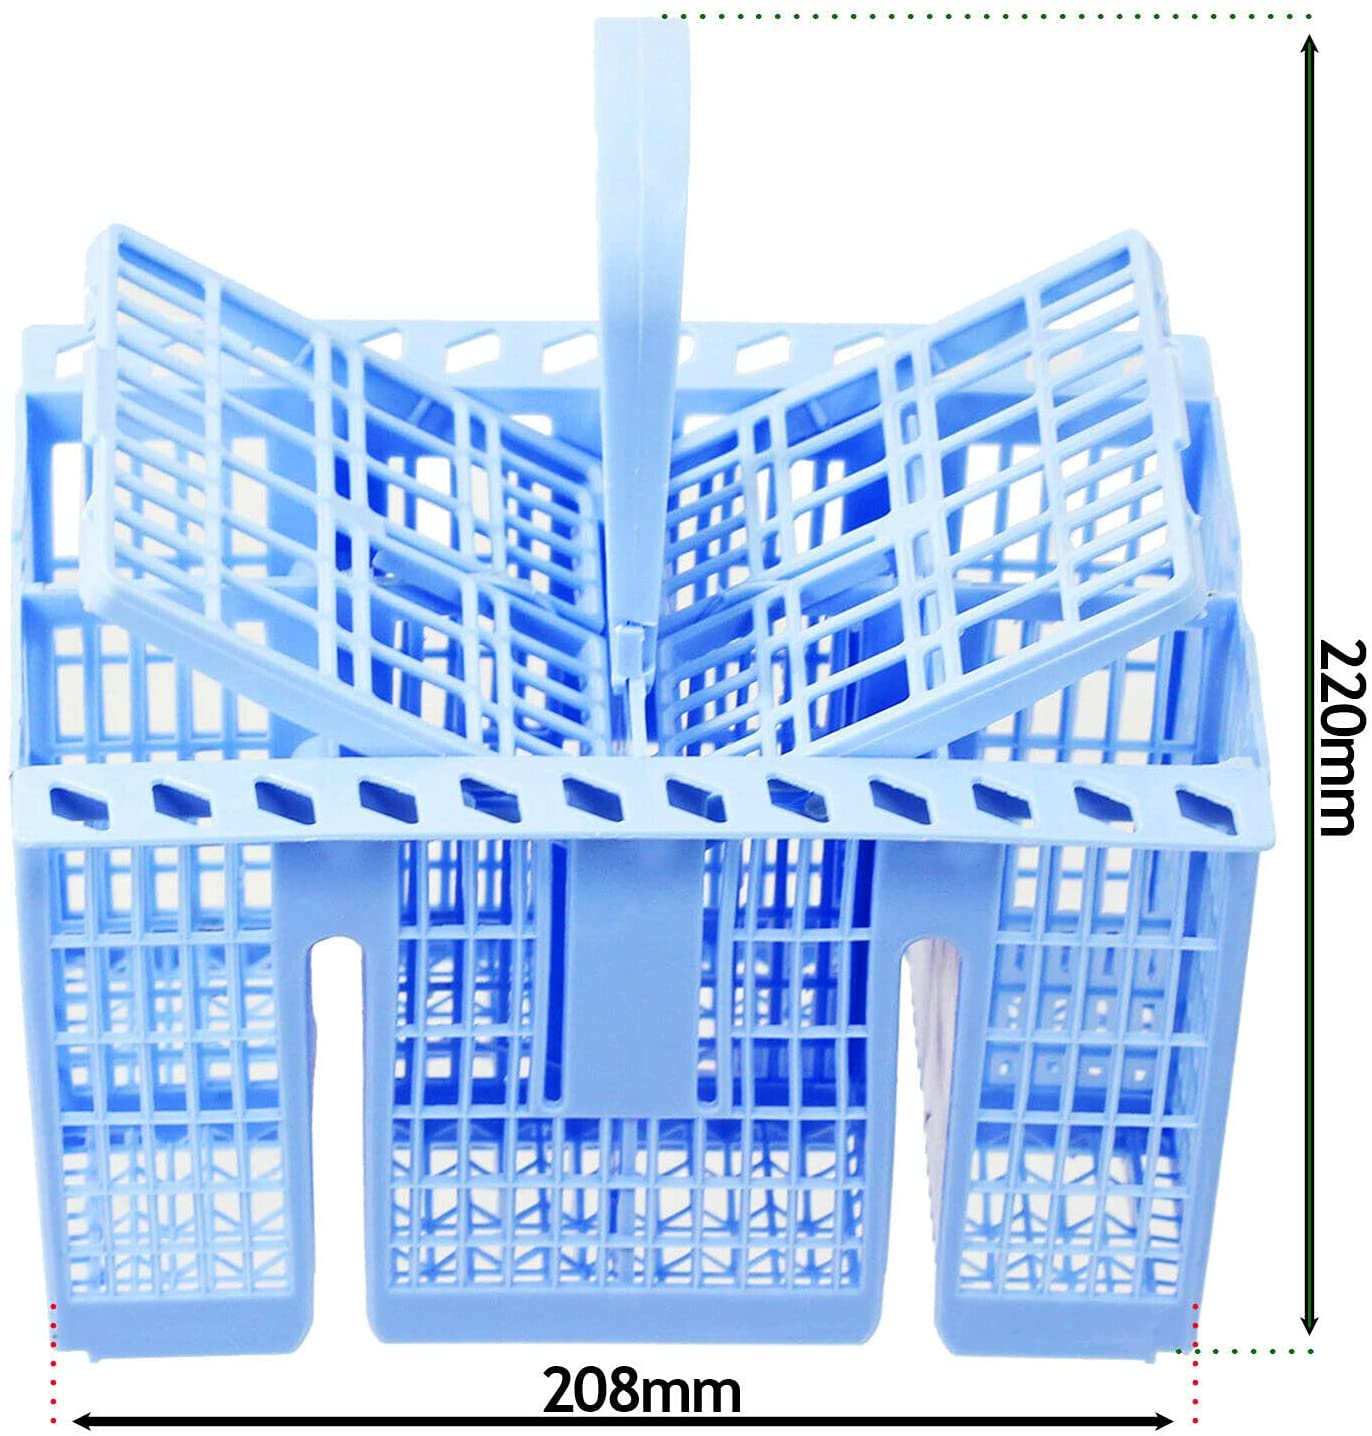 SPARES2GO Cutlery Basket compatible with Frigidaire Dishwasher (Blue, 220 x 208 x 160mm)